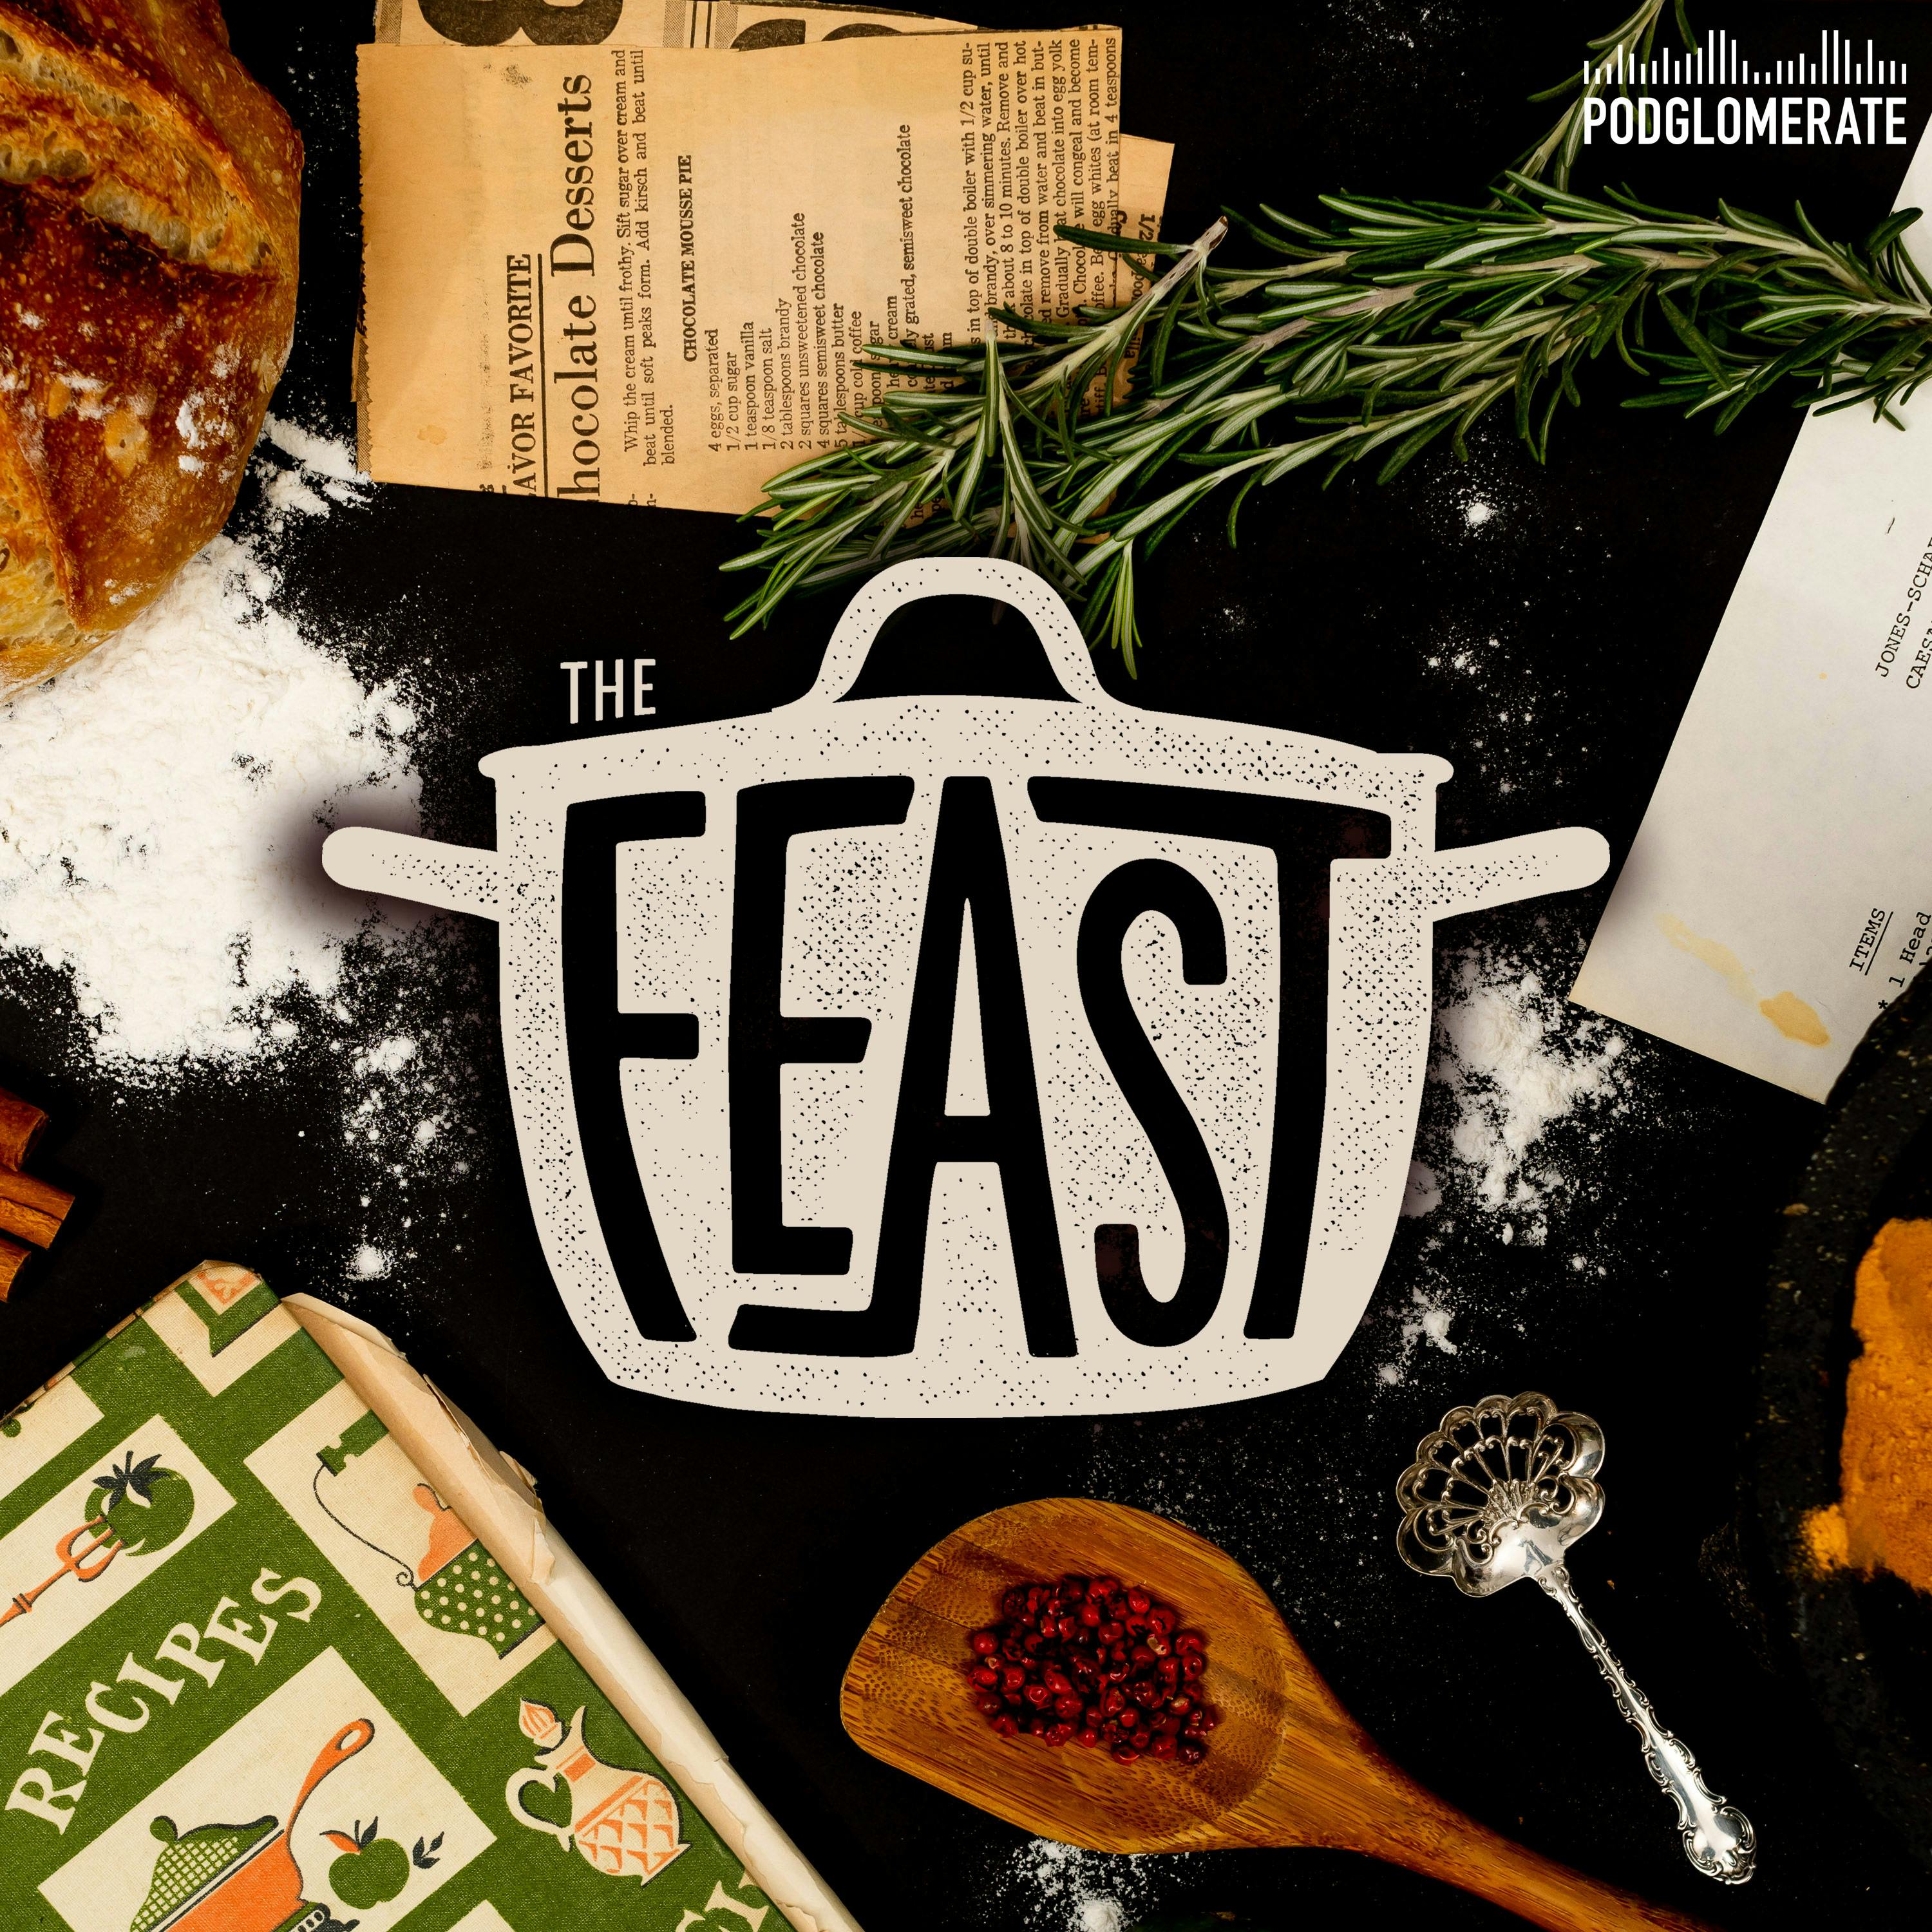 The Feast:The Feast